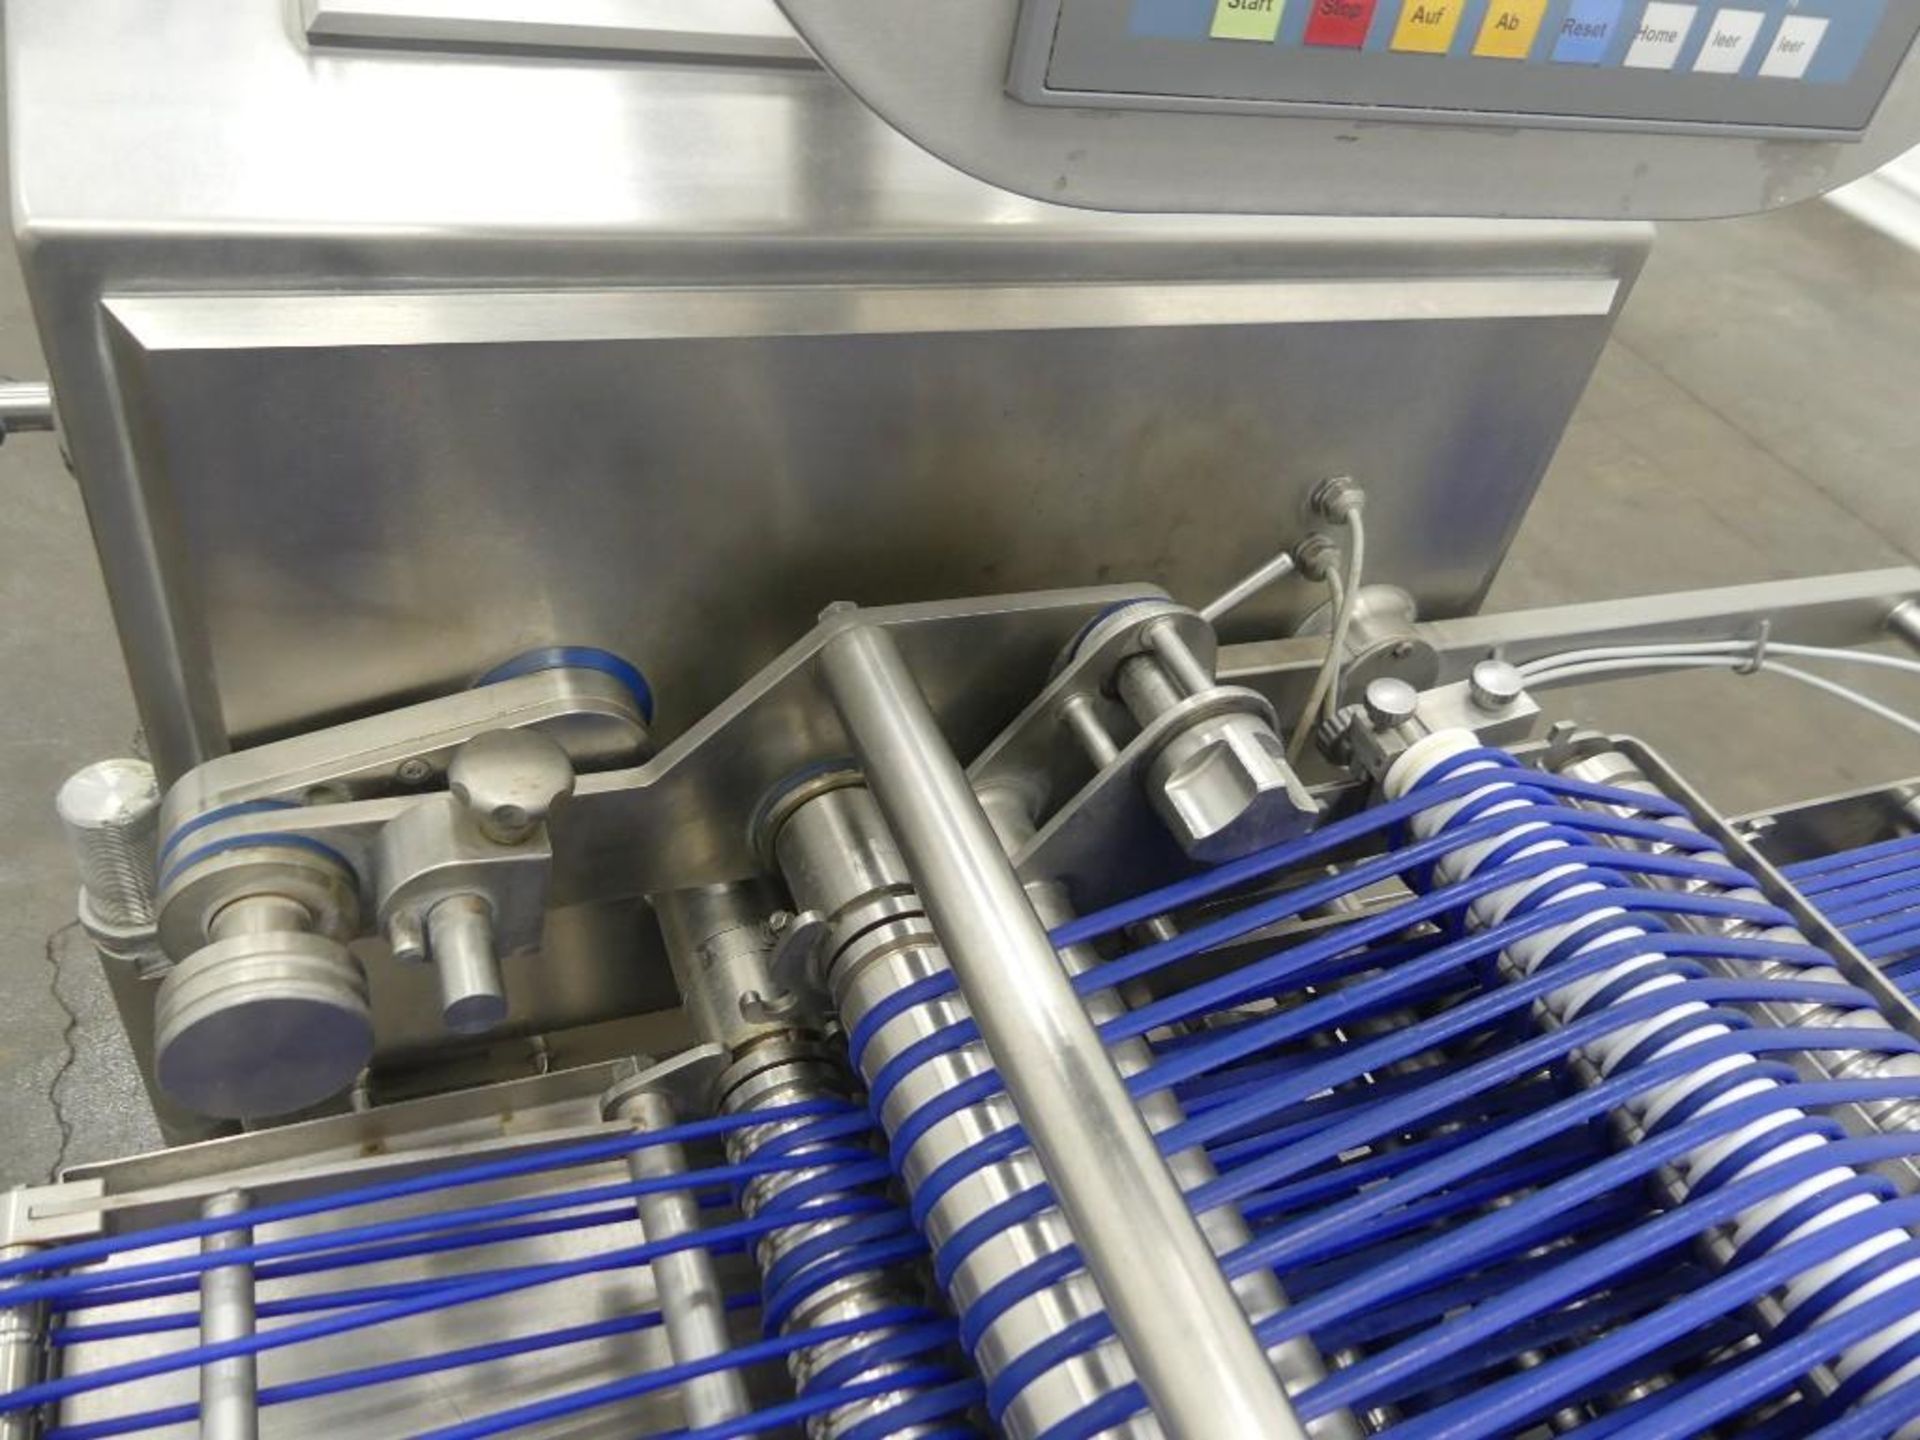 Tech for Food Roll it Stainless Steel Food Roller - Image 5 of 41